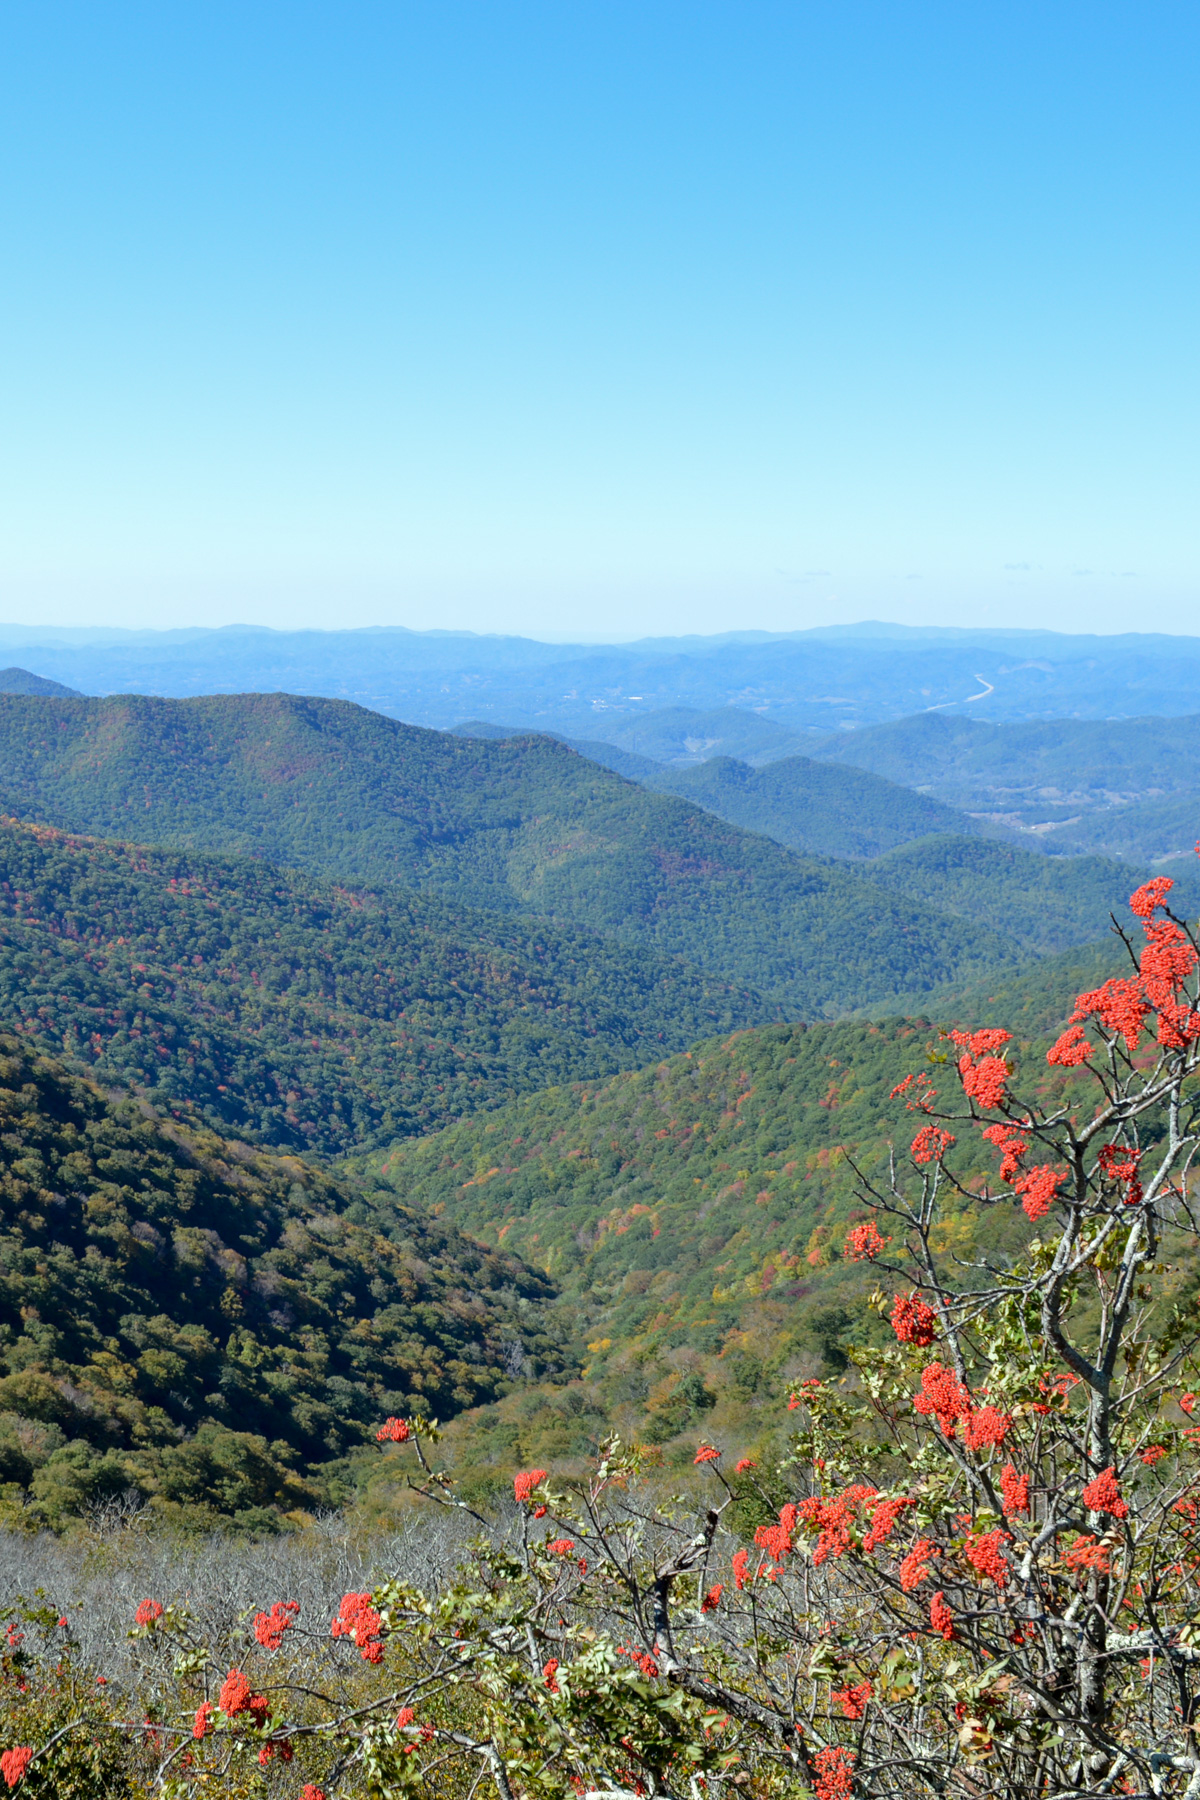 Plan your Blue Ridge Parkway Road Trip through North Carolina with our guide, including suggestions for sightseeing, food, and beer!